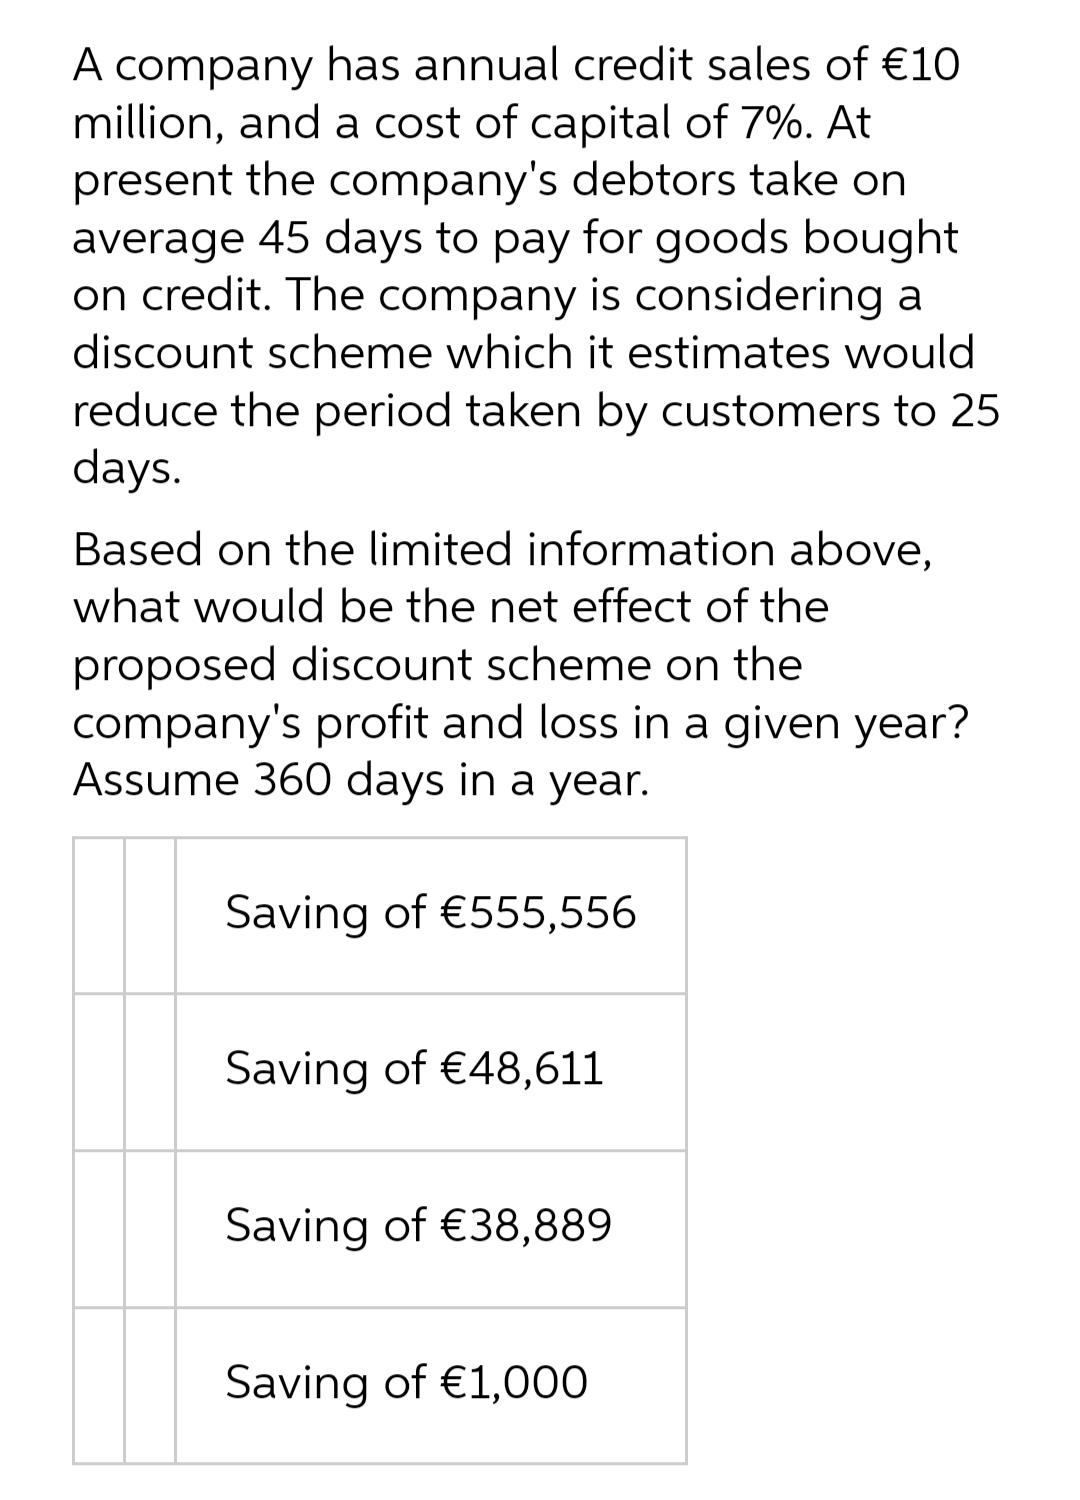 A company has annual credit sales of €10
million, and a cost of capital of 7%. At
present the company's debtors take on
average 45 days to pay for goods bought
on credit. The company is considering a
discount scheme which it estimates would
reduce the period taken by customers to 25
days.
Based on the limited information above,
what would be the net effect of the
proposed discount scheme on the
company's profit and loss in a given year?
Assume 360 days in a year.
Saving of €555,556
Saving of €48,611
Saving of €38,889
Saving of €1,000
